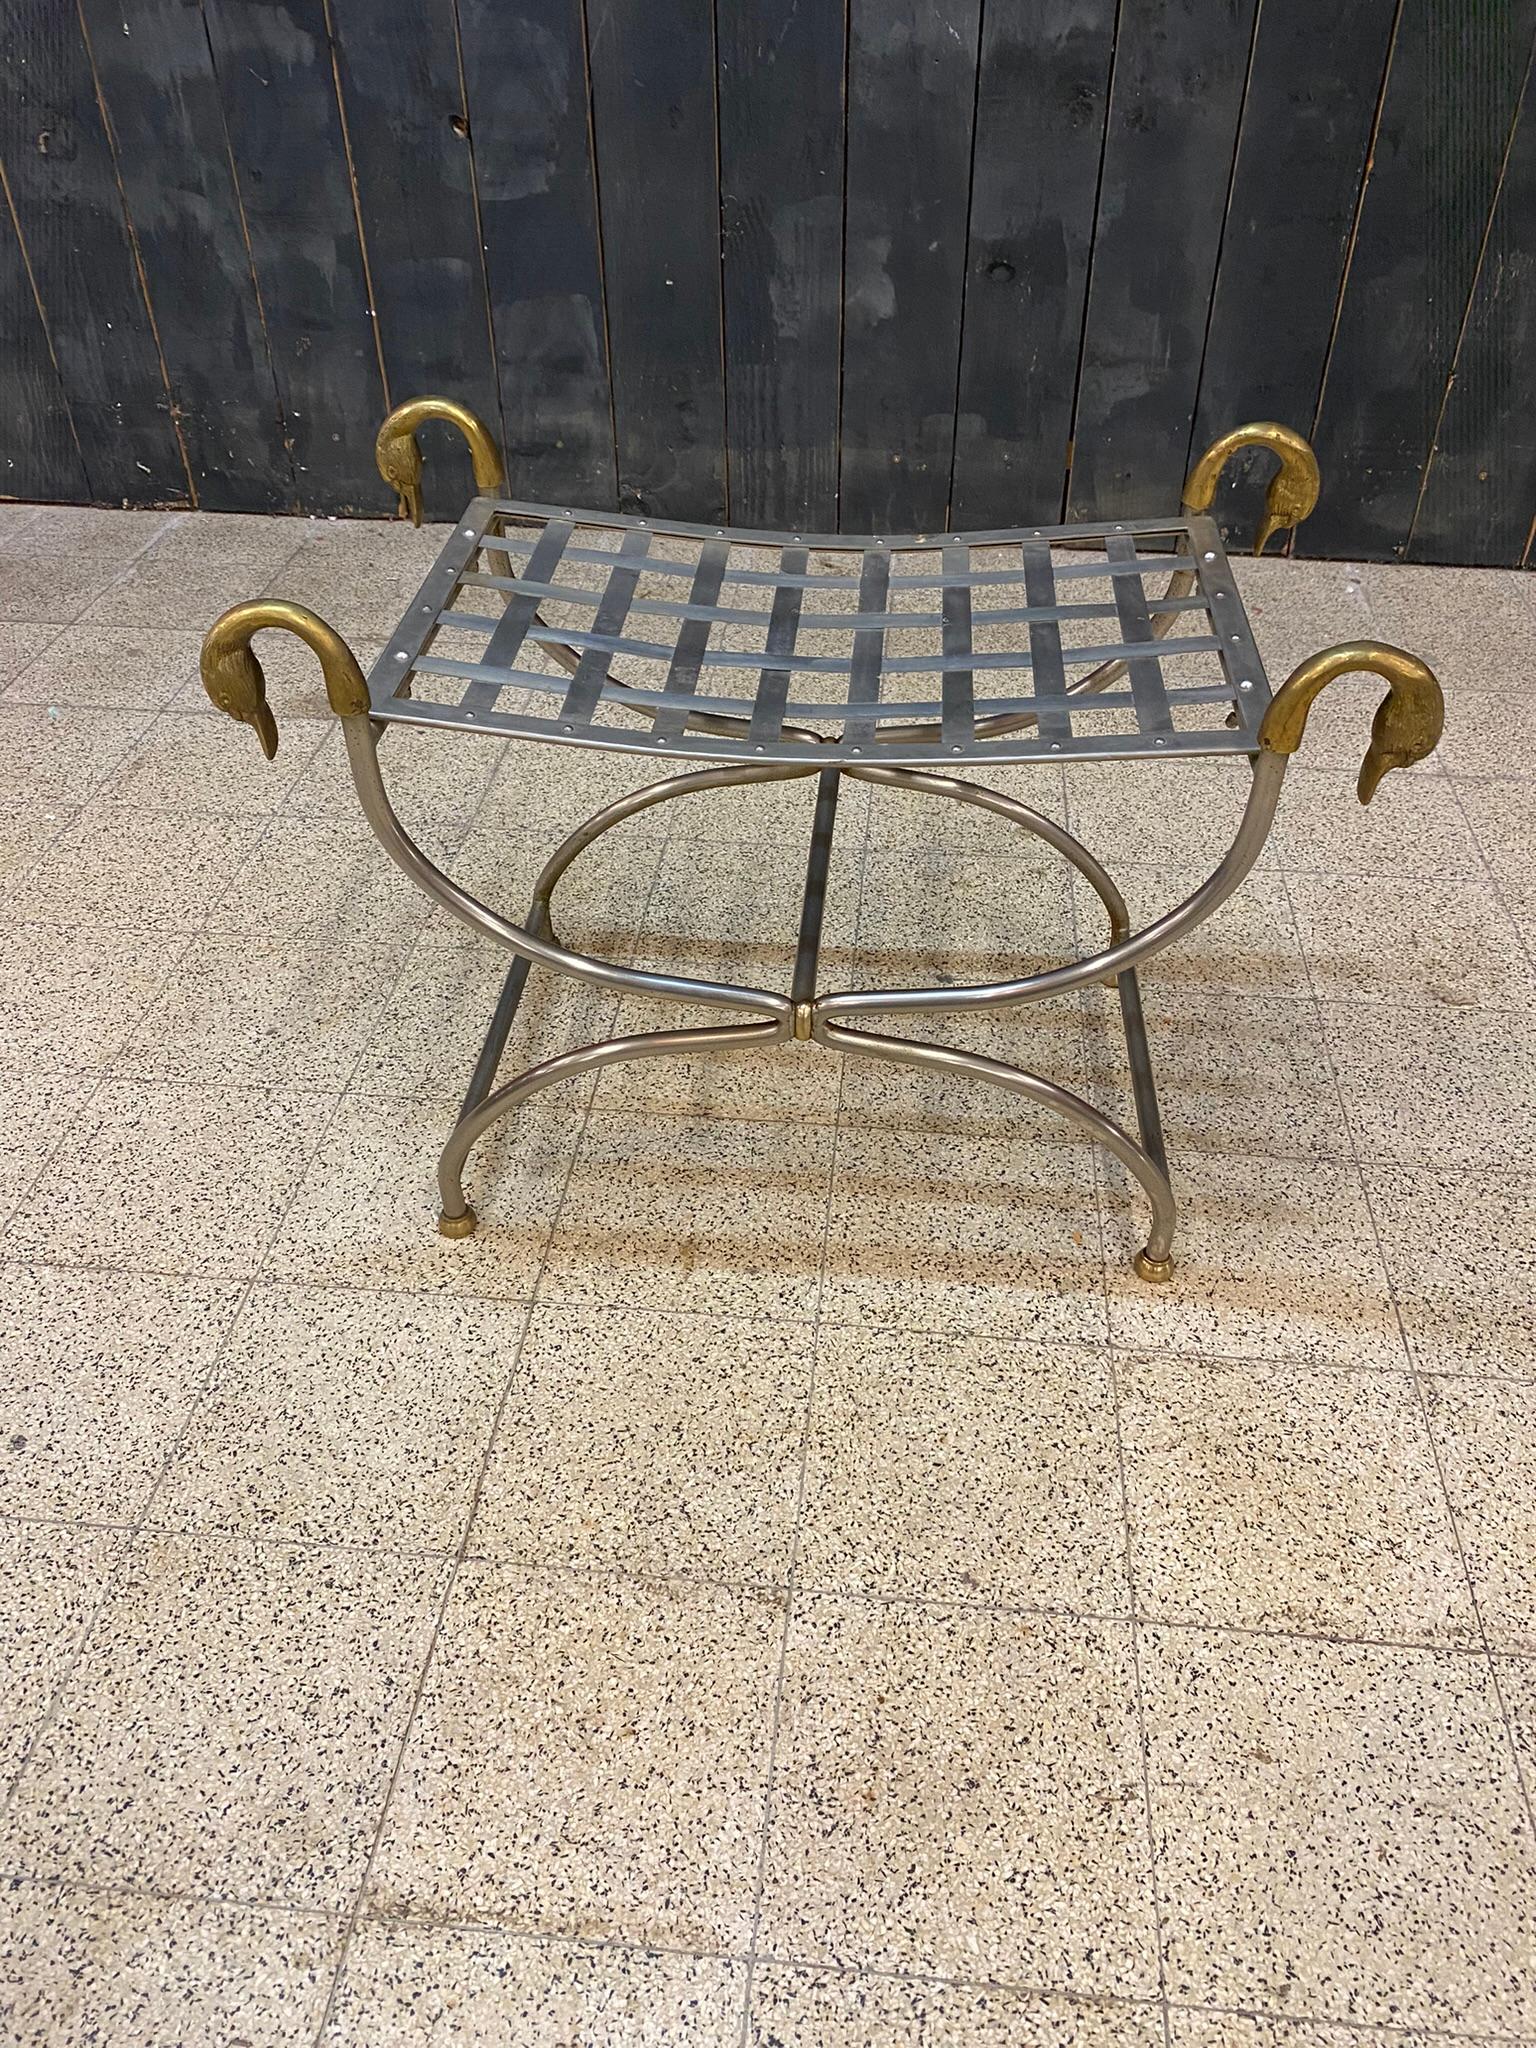 Maison Jansen, curulle stool in steel and brass circa 1950/1960
top quality.